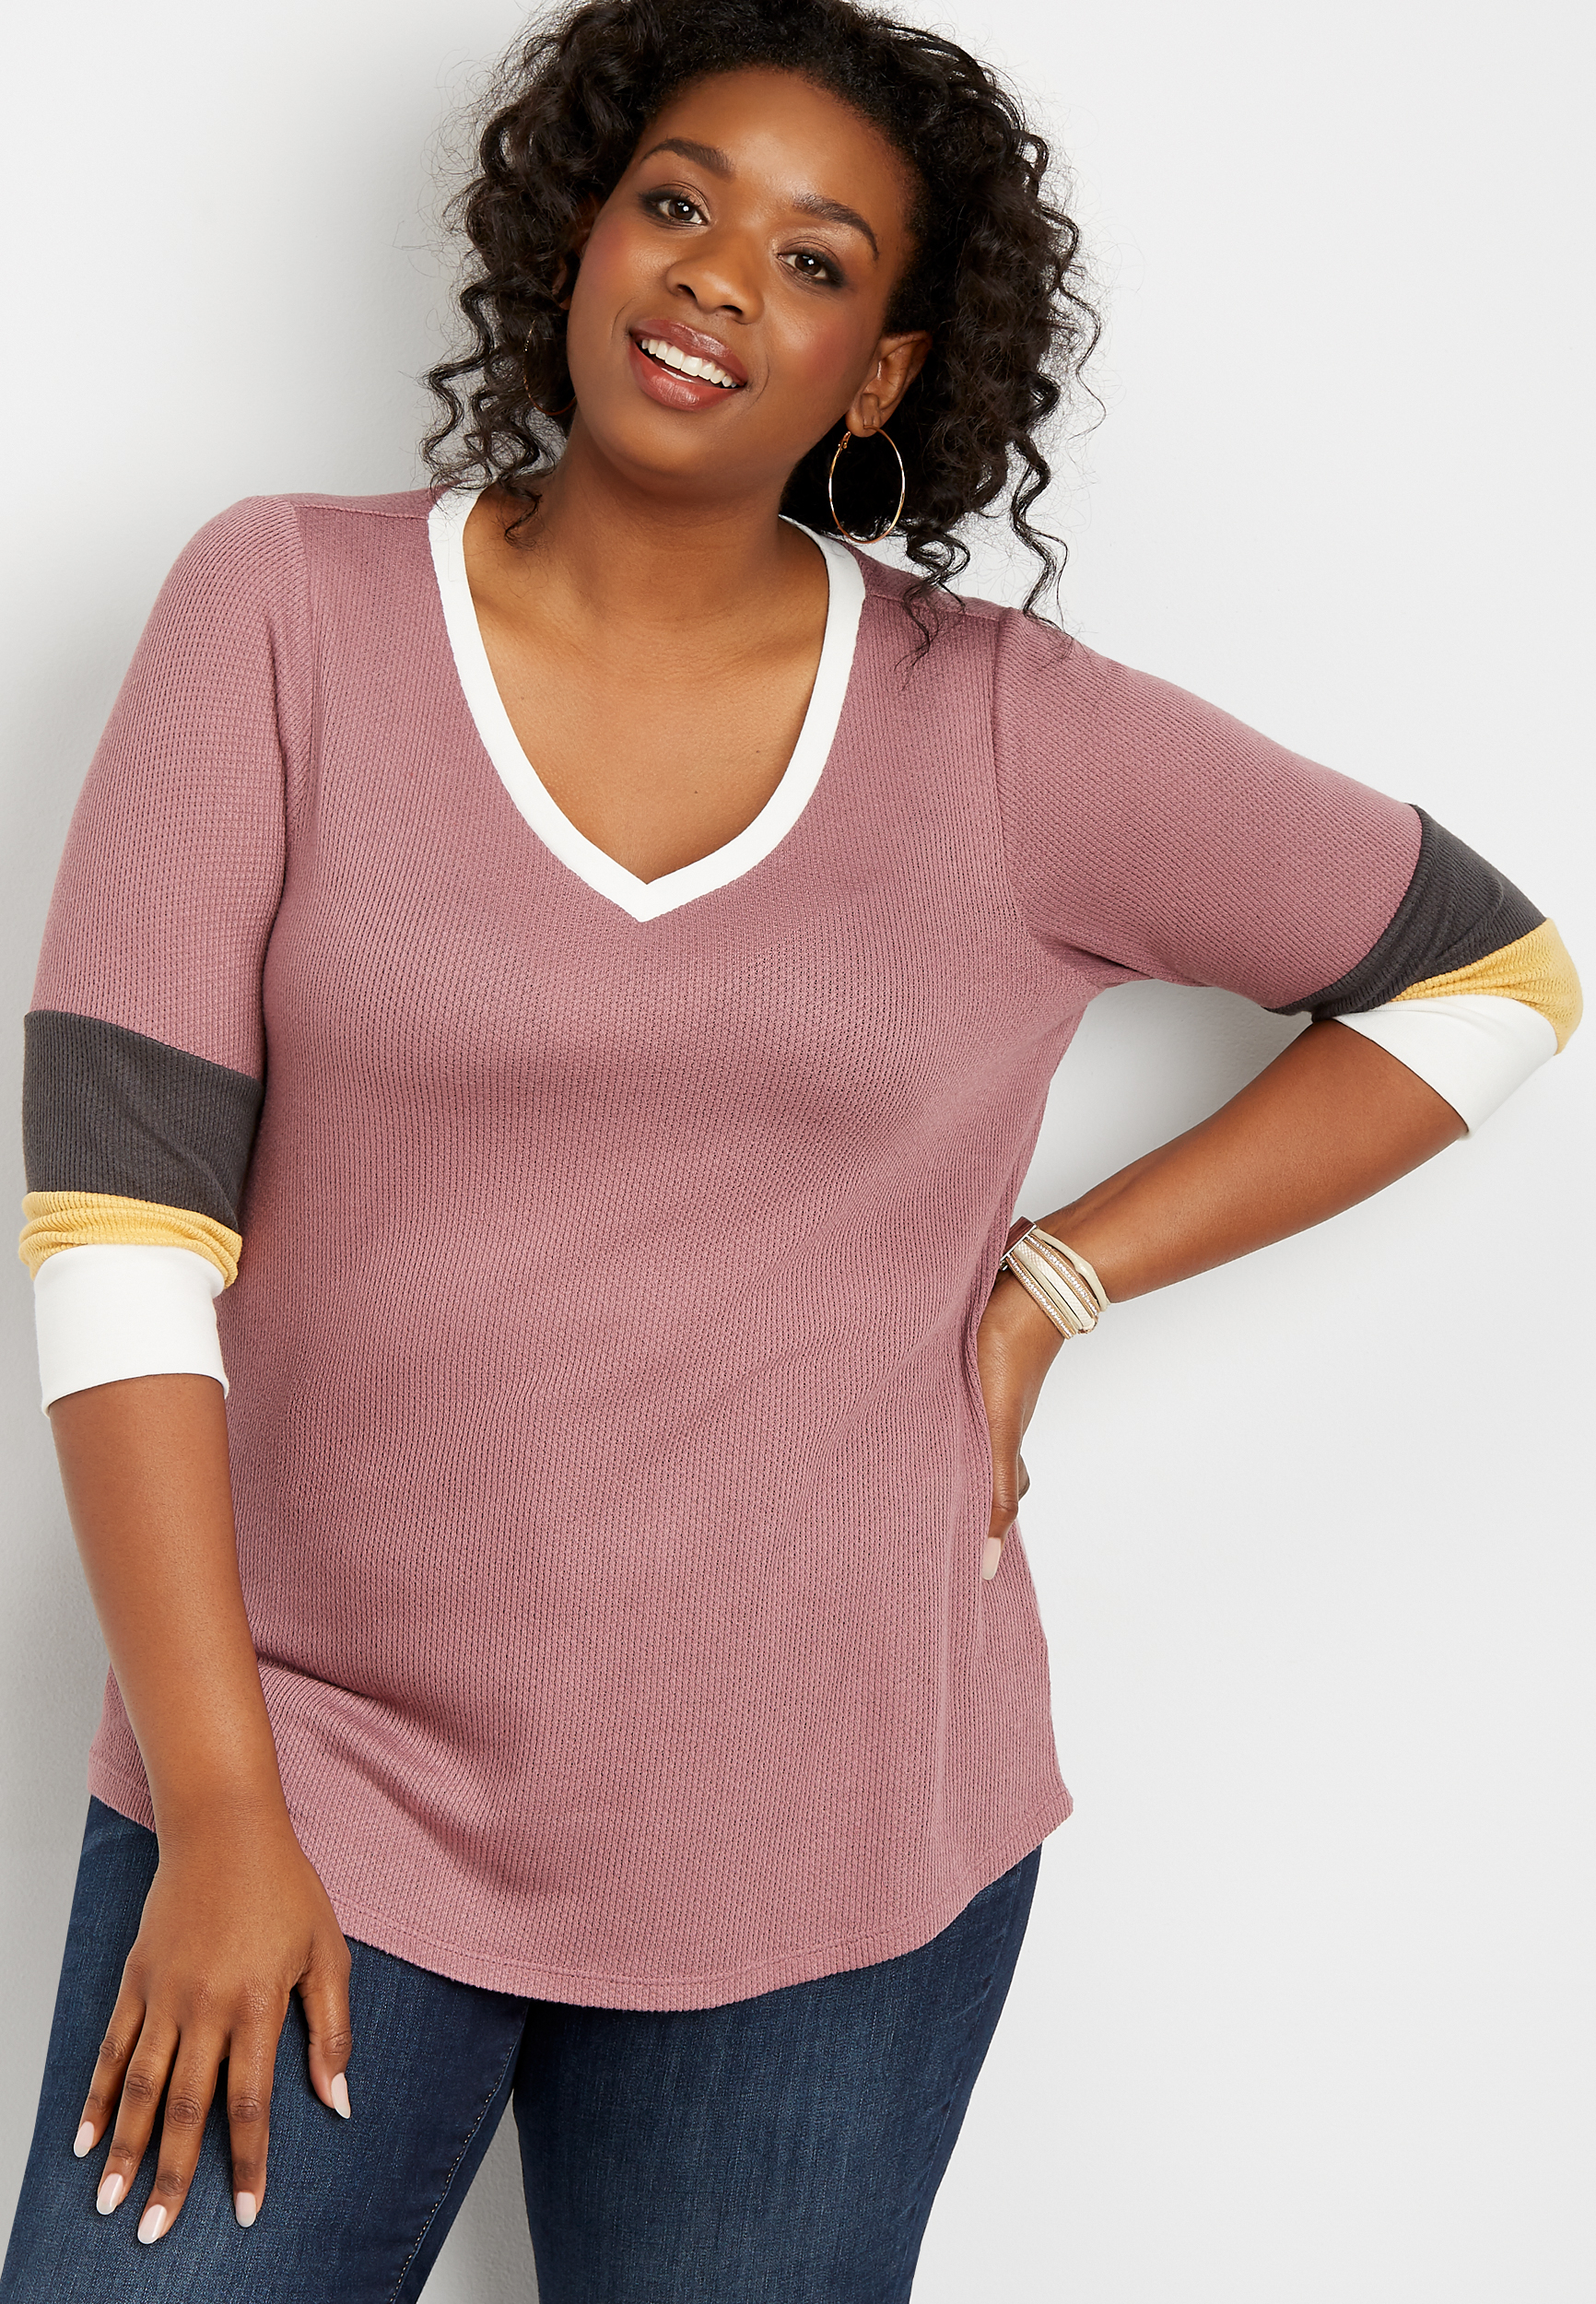 Trendy Plus Size Clothing for Women | Cute Women's Clothes | maurices